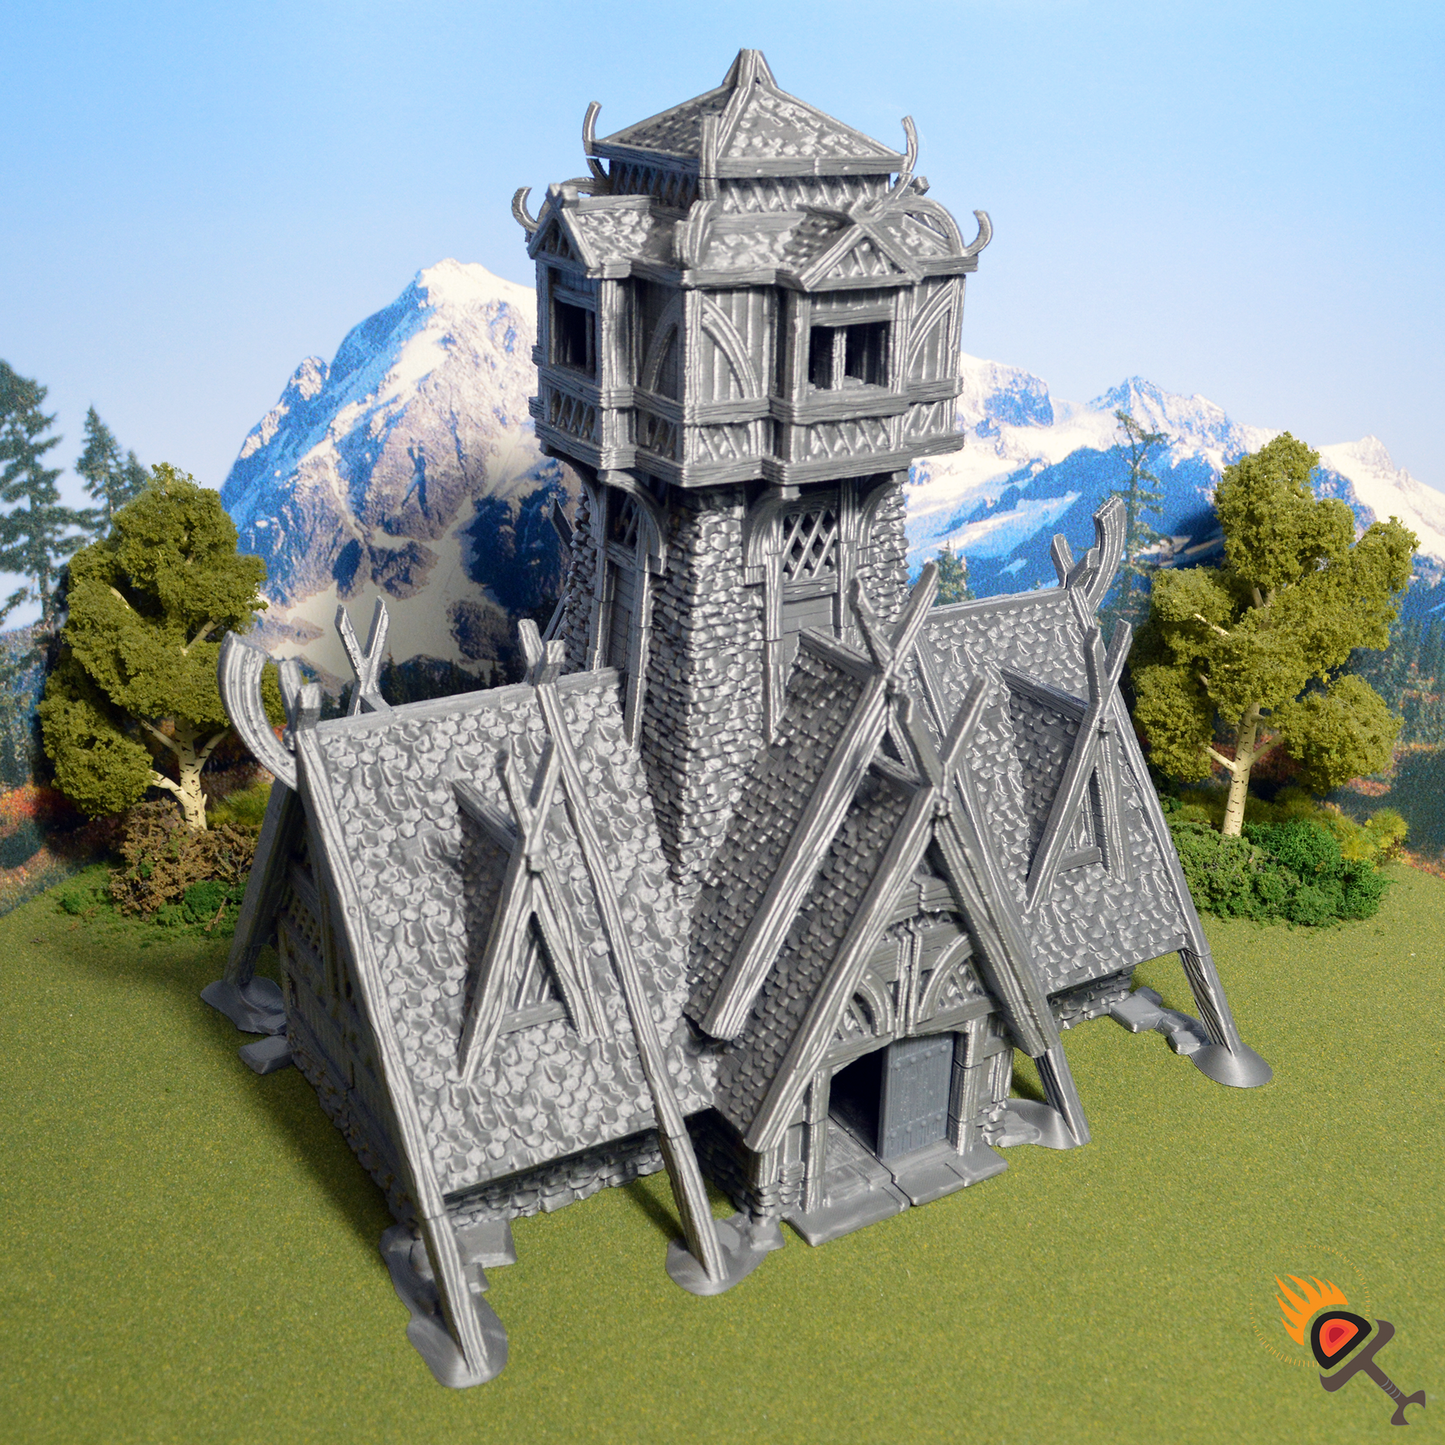 Odingard Norse Hall 28mm for D&D Terrain, DnD Pathfinder Fantasy Barbarian Viking Great Hall, Dark Realms, Gift for Tabletop Gamers